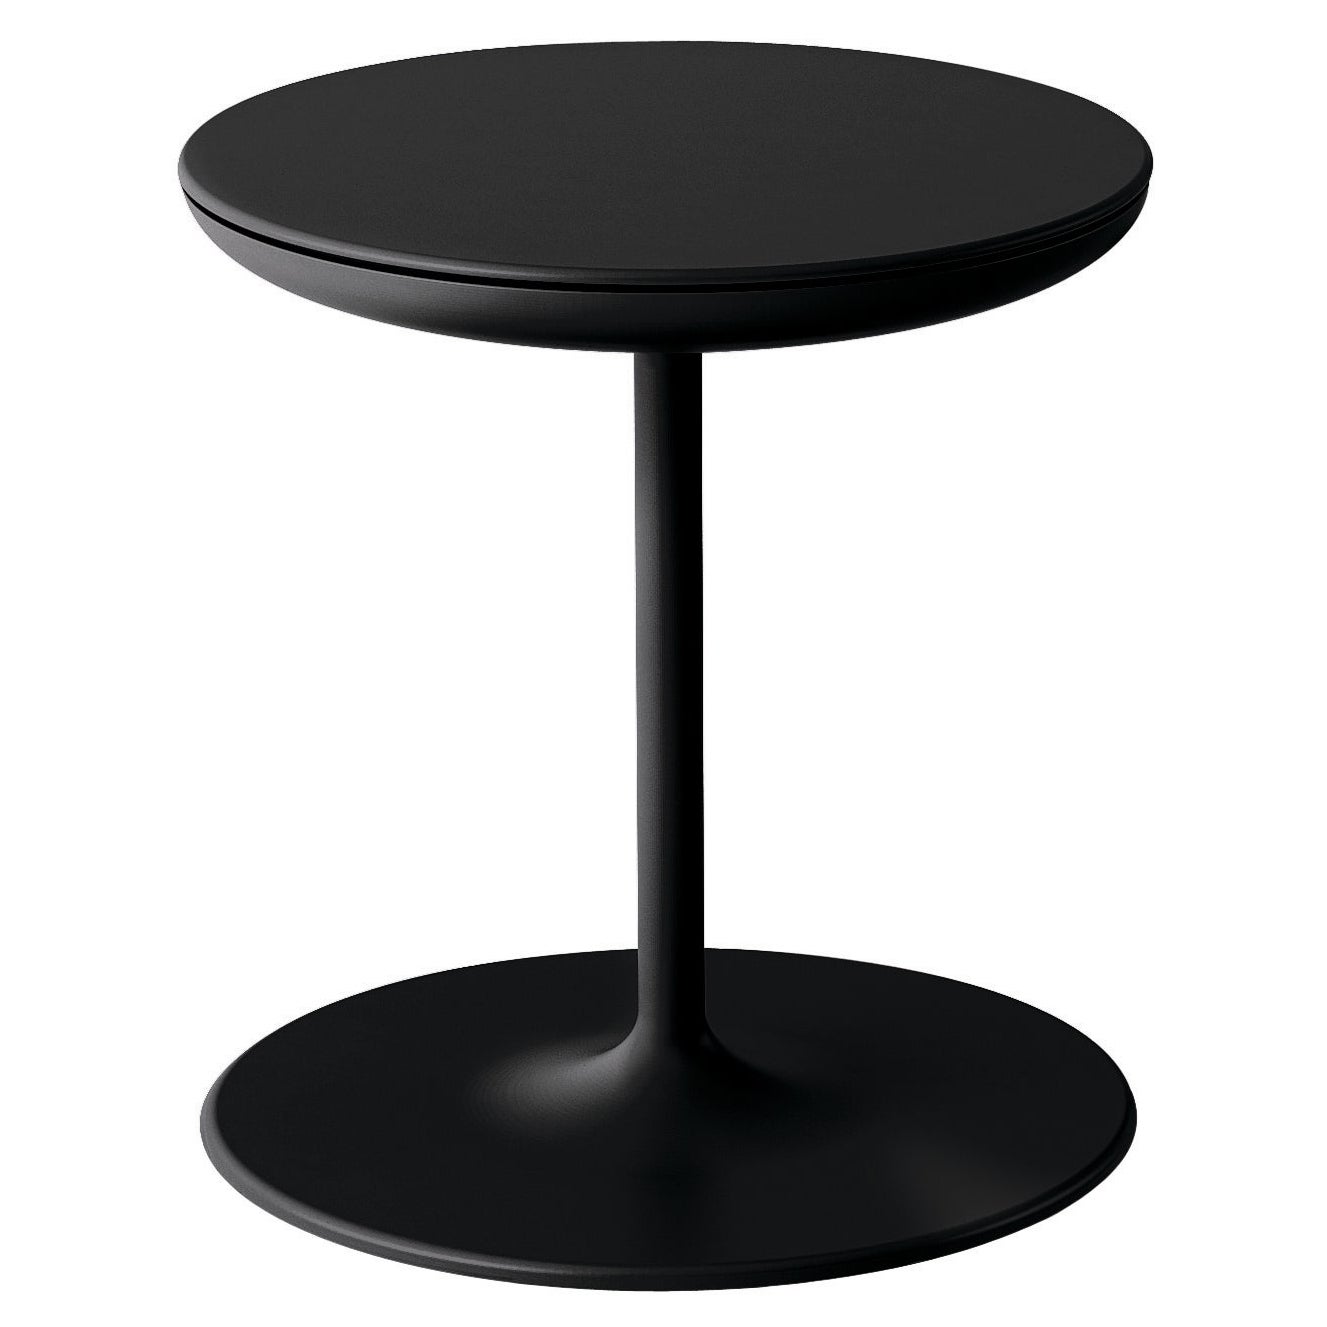 Zanotta Toi Small Table in Black Finish with Plywood Top by Salvatore Indriolo For Sale